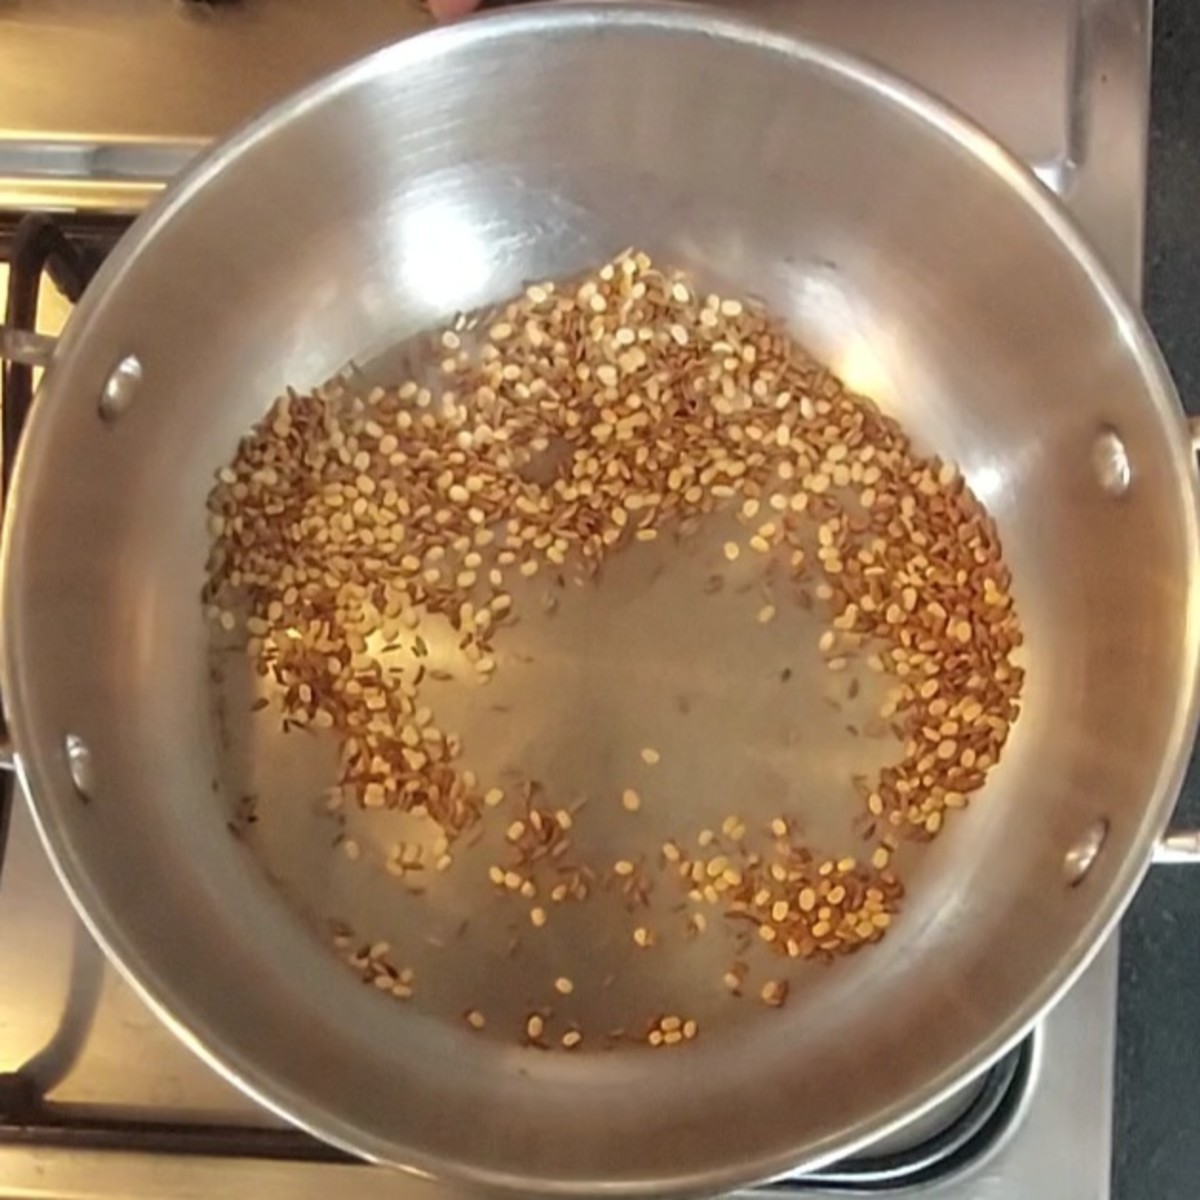 Fry over low flame till urad dal turns golden brown and aromatic. Transfer to a bowl.